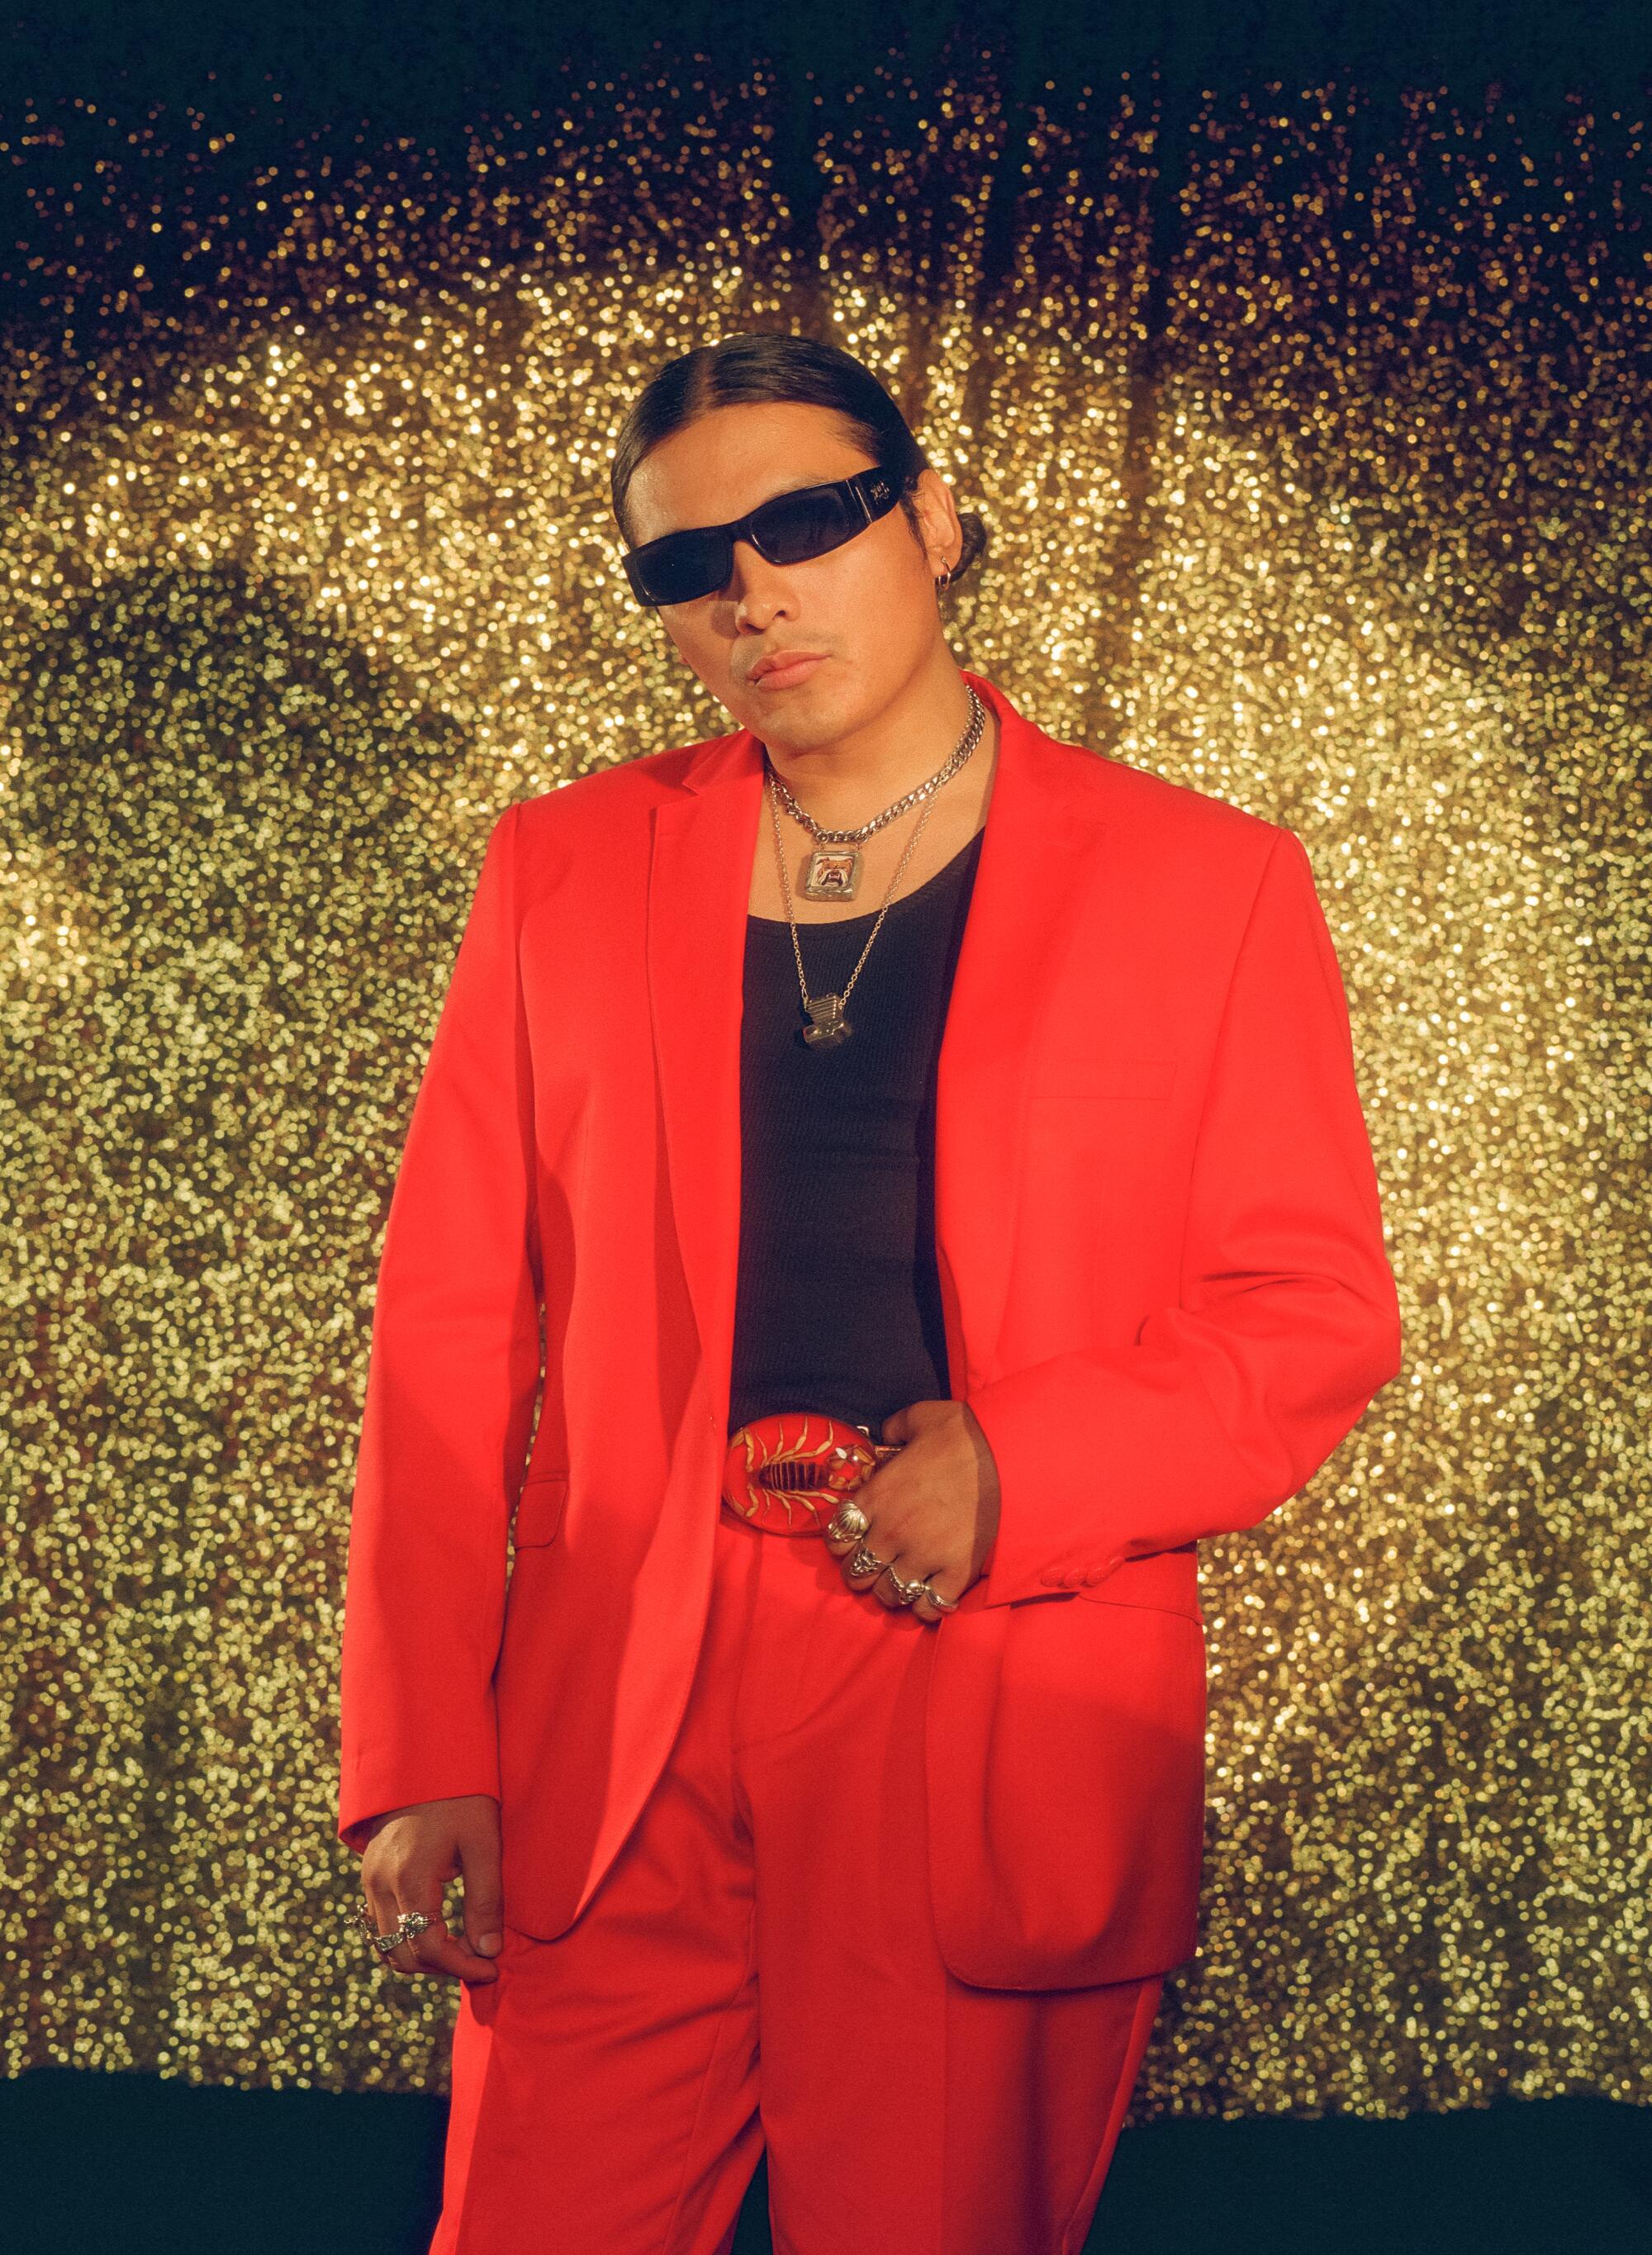 A man in a red suit and sunglasses poses in front of a golden curtain